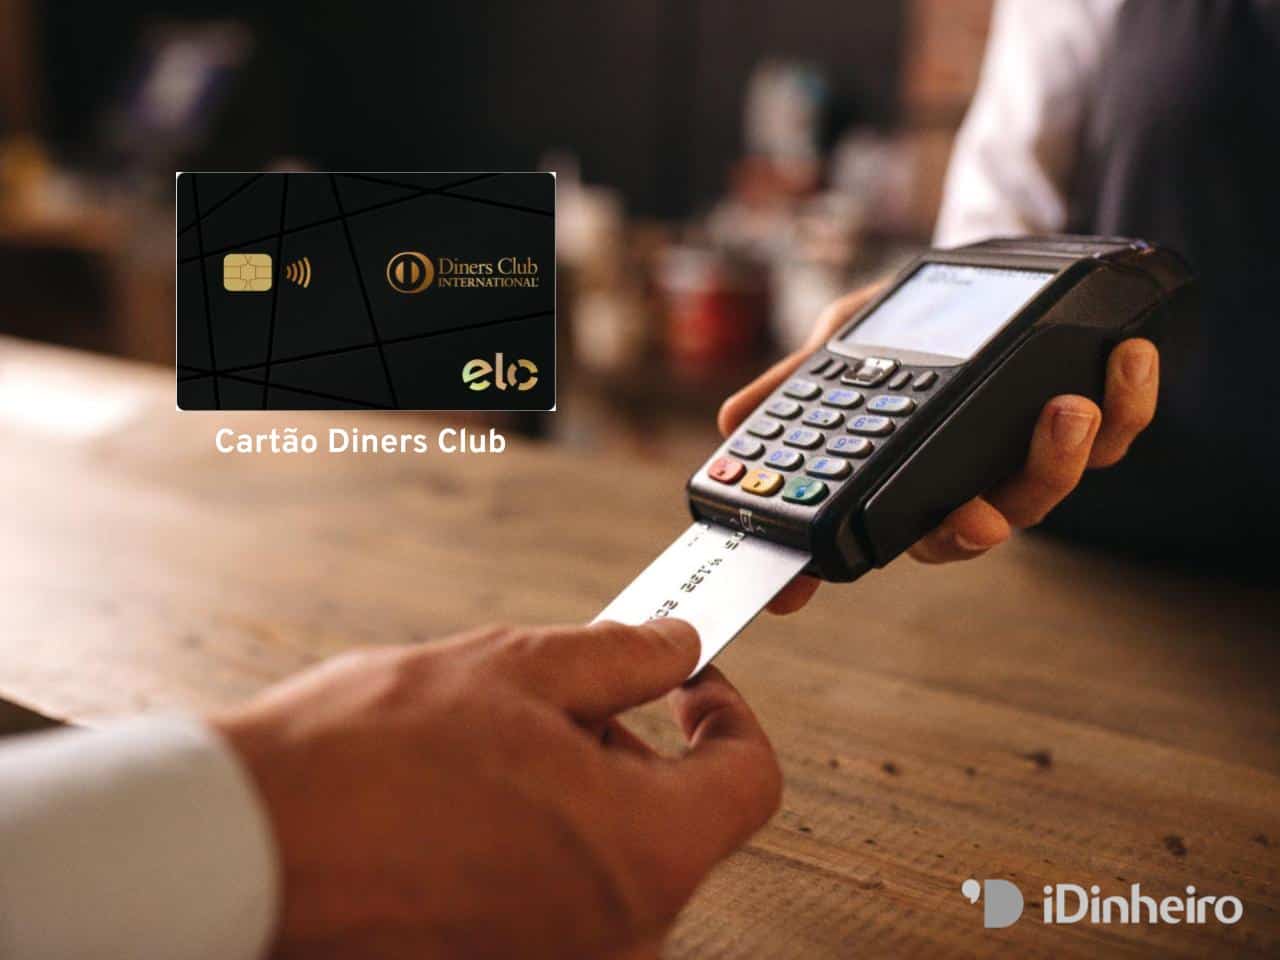 Elo Diners Club